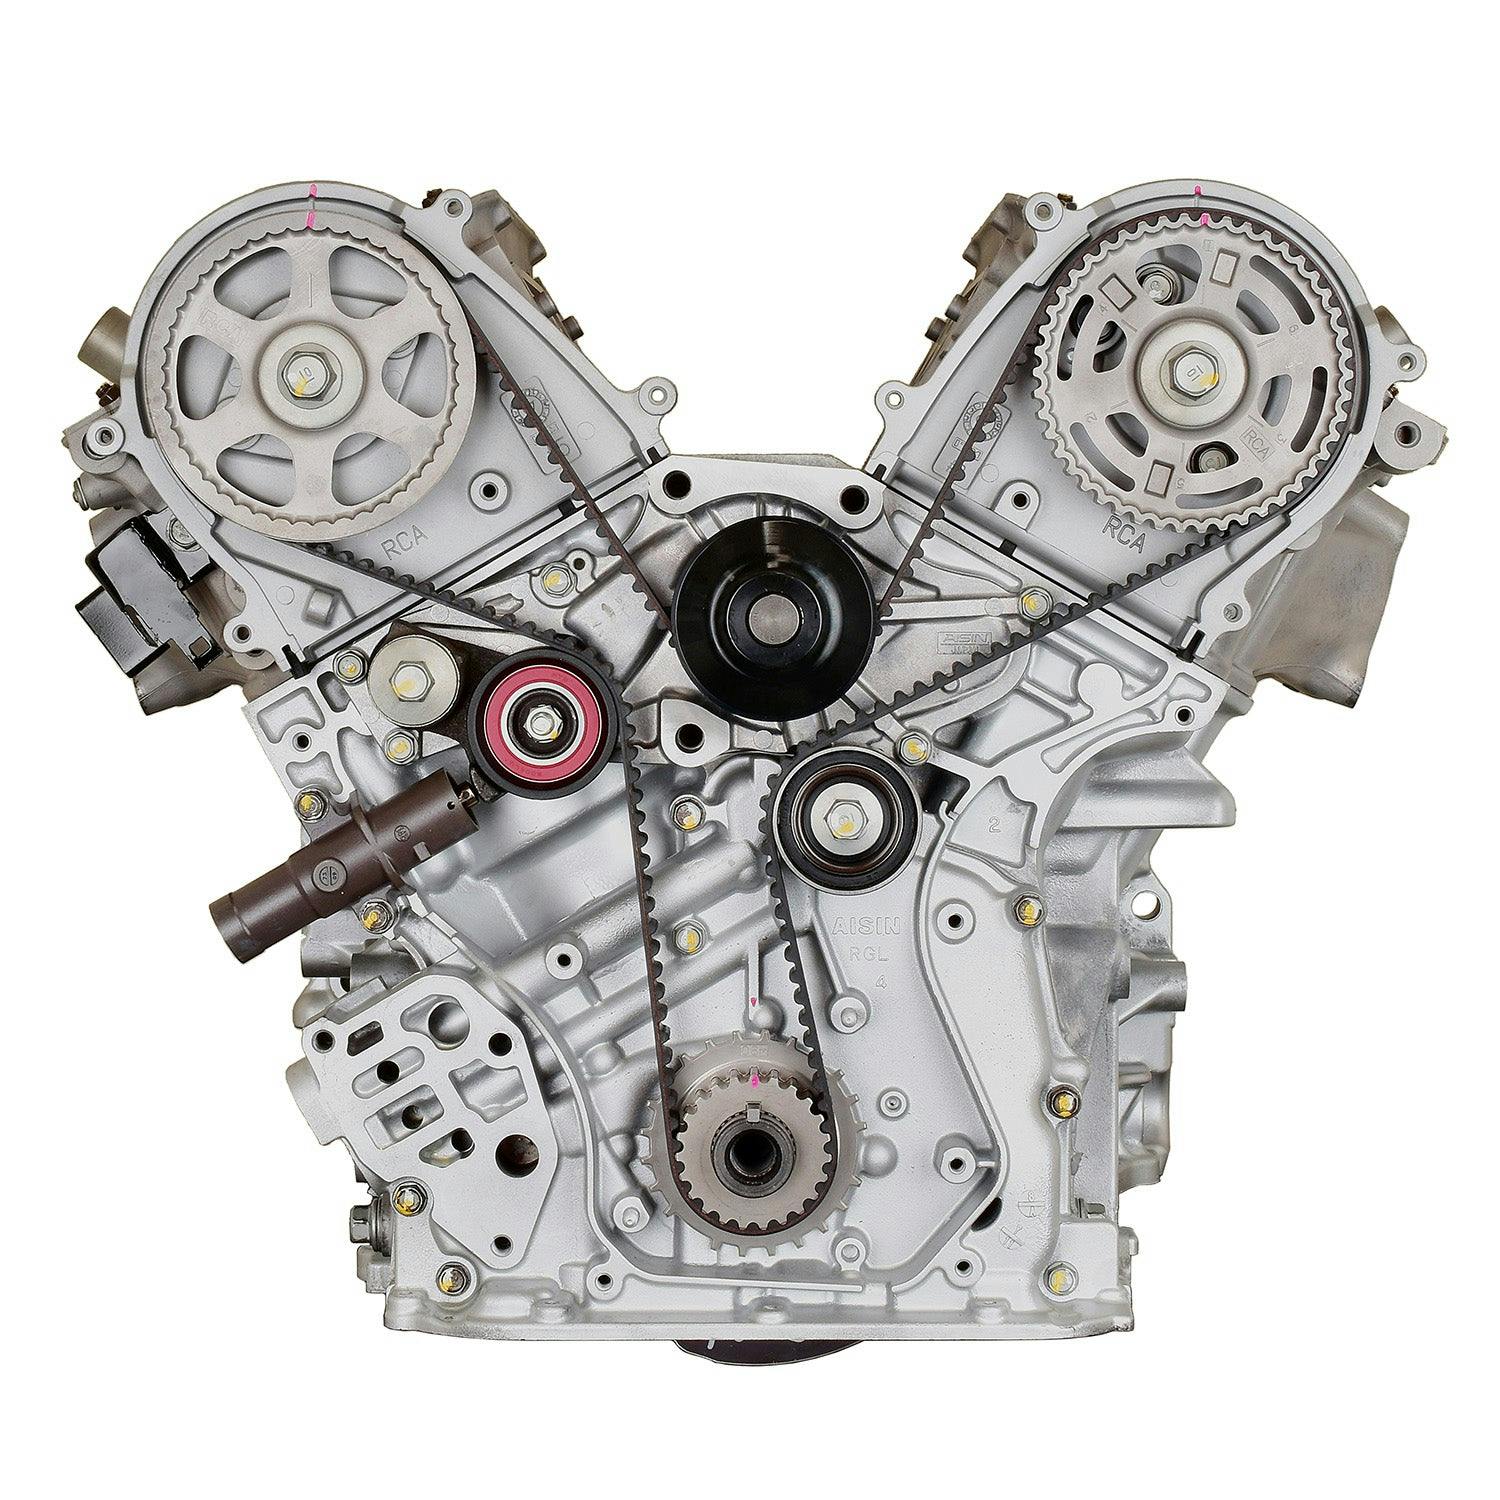 3.2L V6 Engine for 2007-2008 Acura TL